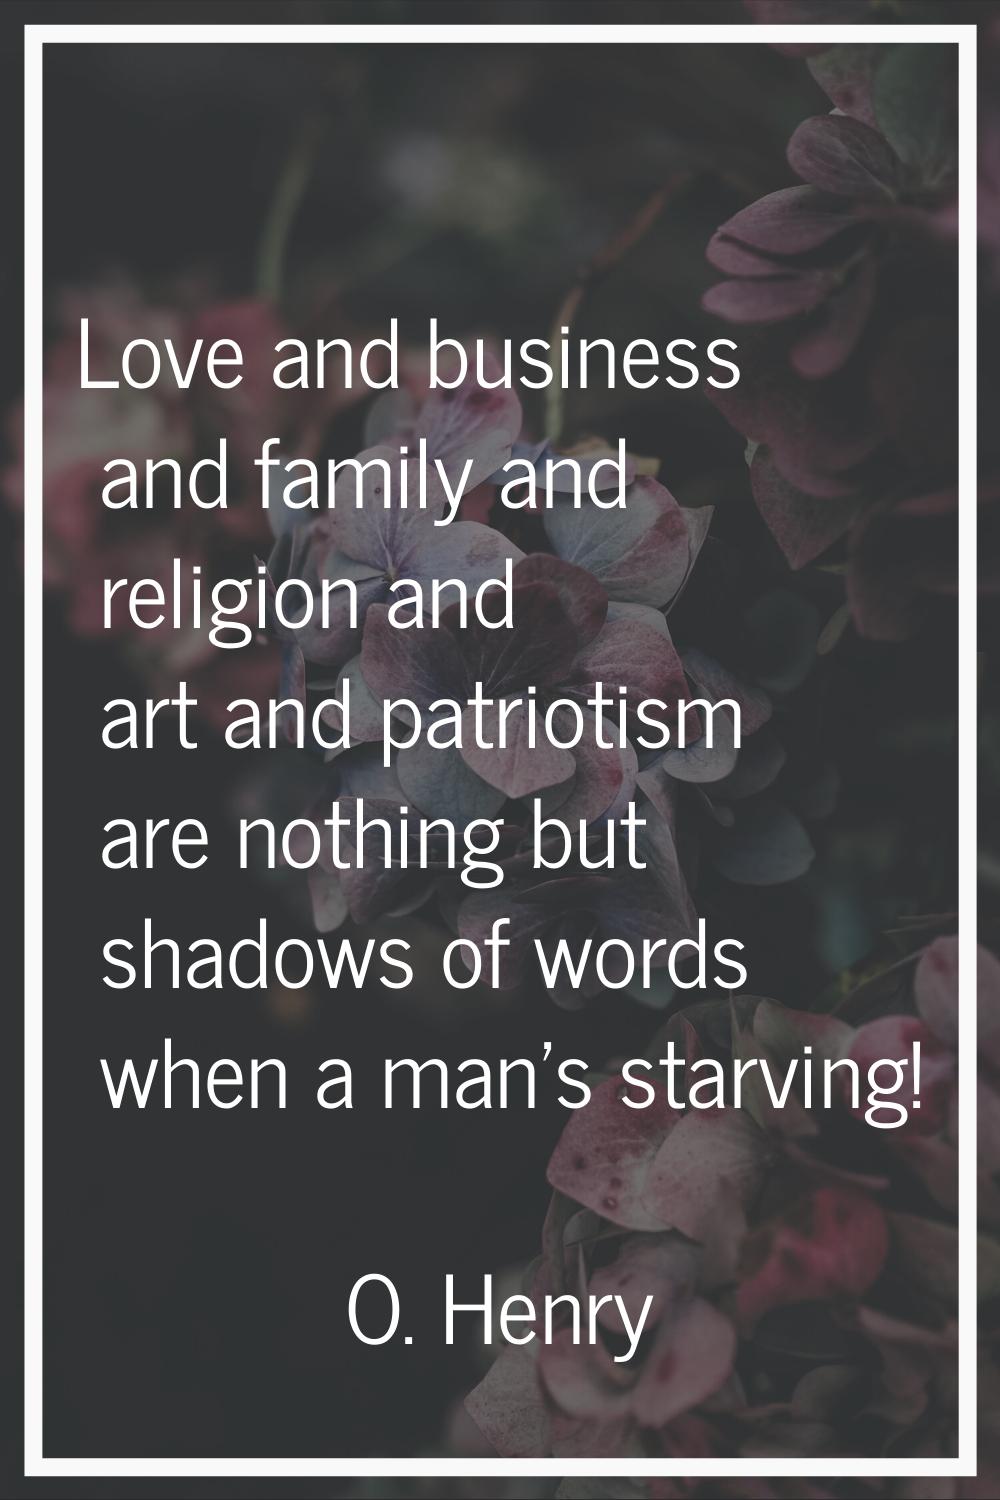 Love and business and family and religion and art and patriotism are nothing but shadows of words w